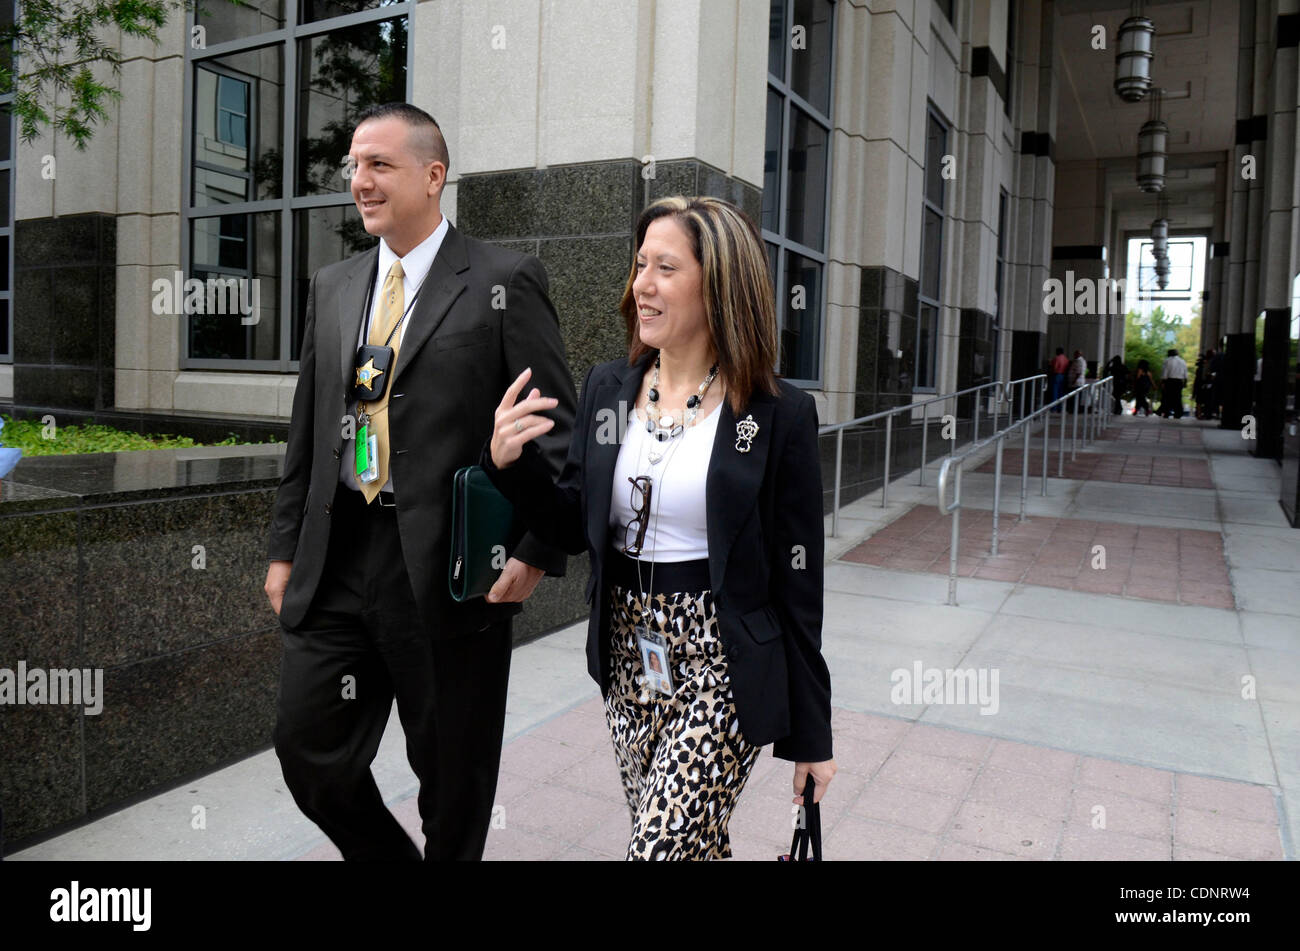 June 27, 2011 - Orlando, Florida, U.S. - Orange County homicide detective YURI MELICH, left, and legal assistant ARLEEN ZAYAS walk to the entrance of the Orange County Courthouse during the Casey Anthony murder trial. Casey Anthony is charged with killing her two-year-old daughter Caylee in 2008. (C Stock Photo